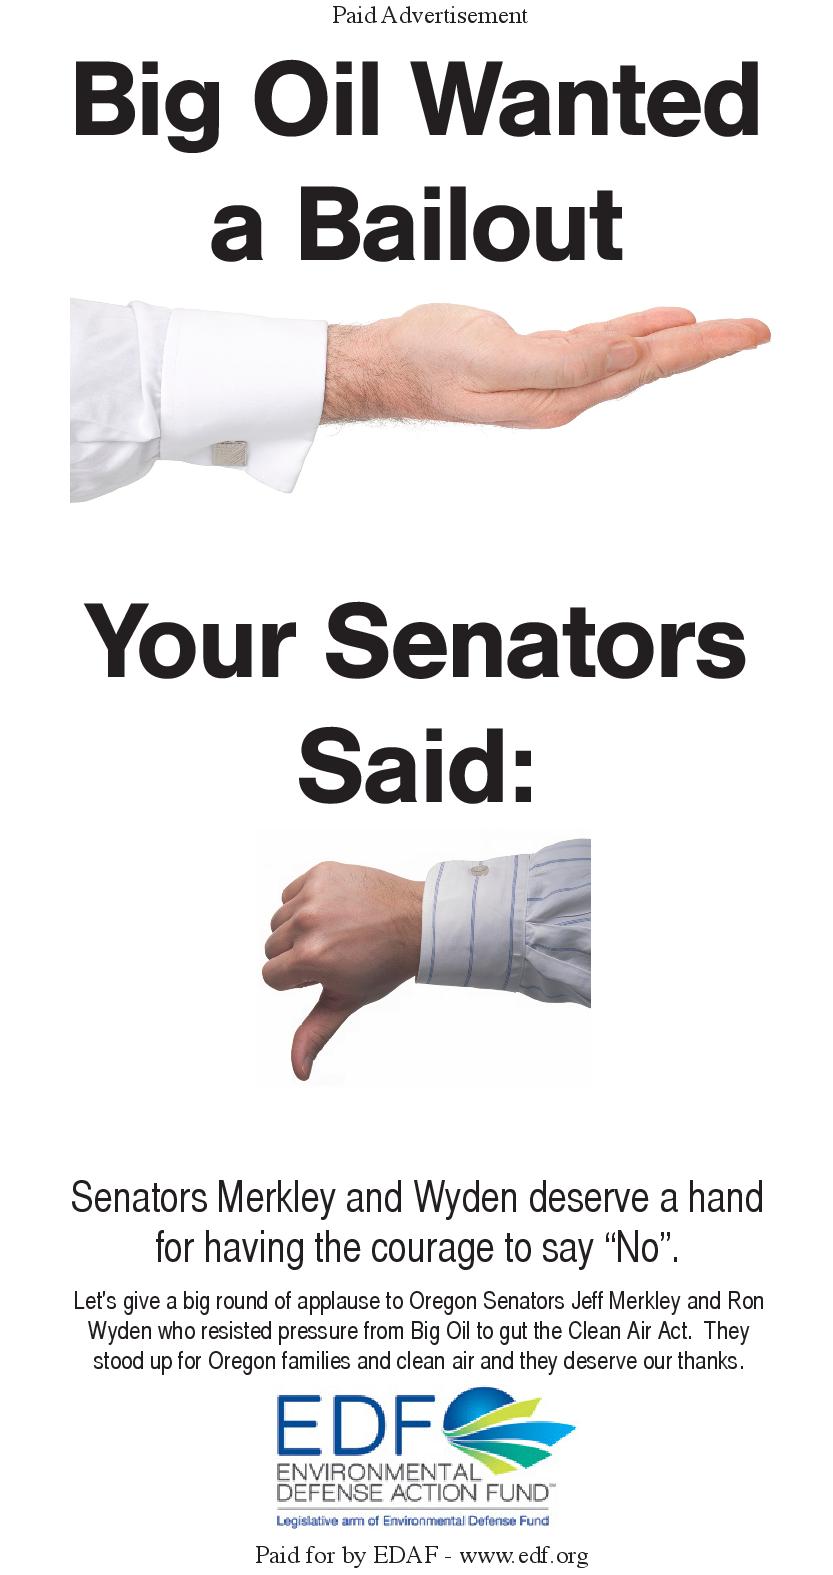 Thank You for Saying "No" to Big Oil: Senators Merkley and Wyden